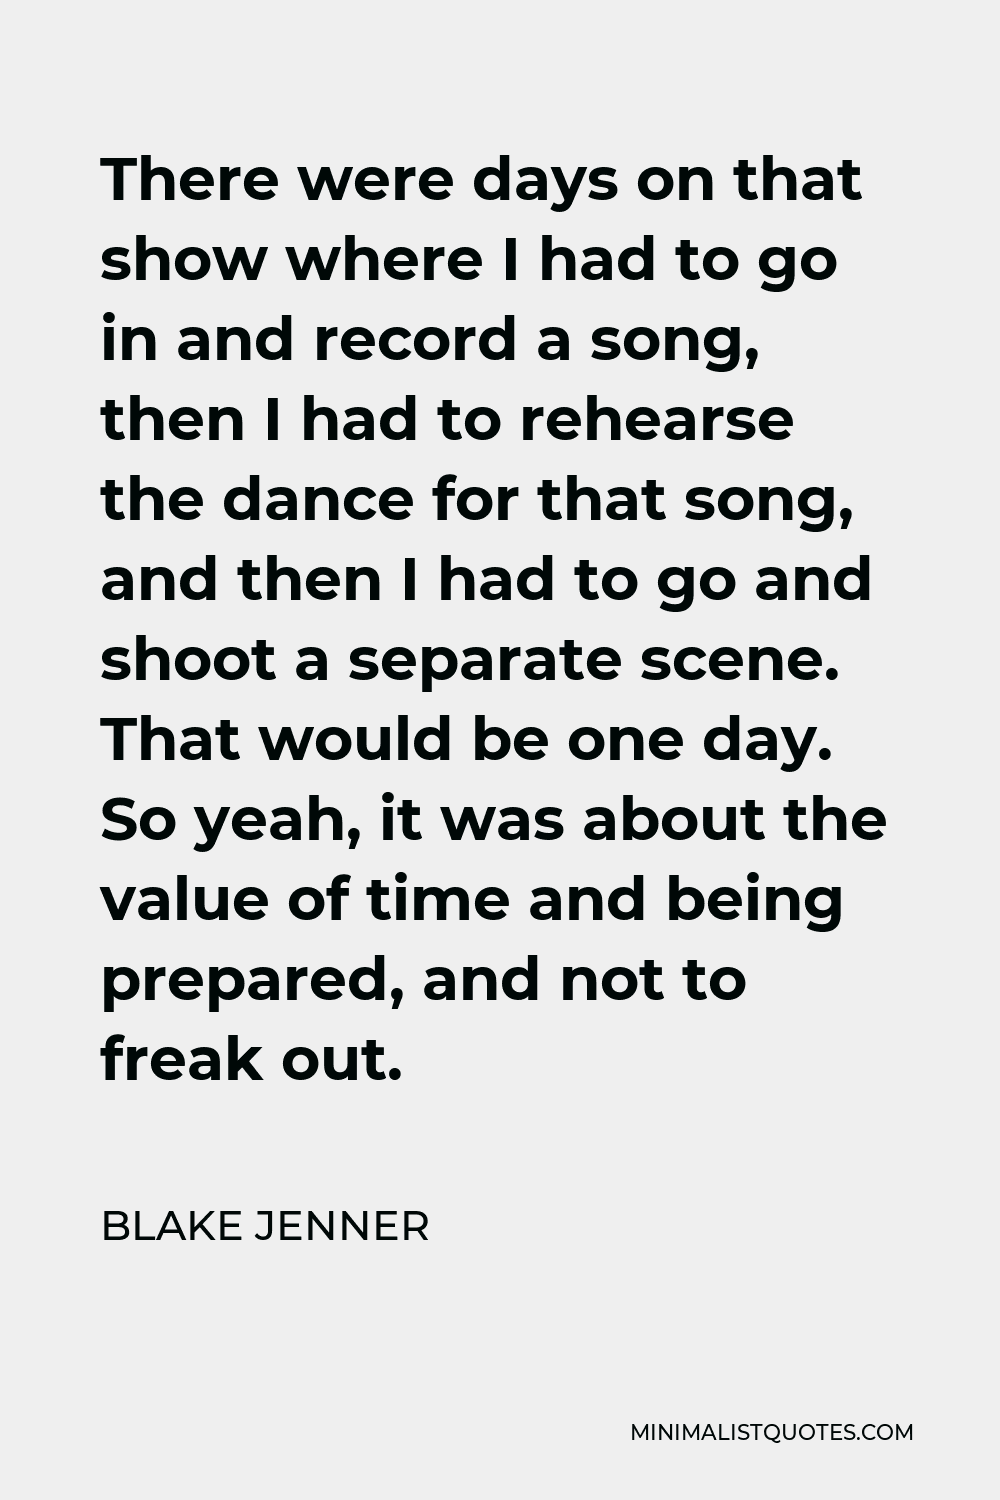 Blake Jenner Quote - There were days on that show where I had to go in and record a song, then I had to rehearse the dance for that song, and then I had to go and shoot a separate scene. That would be one day. So yeah, it was about the value of time and being prepared, and not to freak out.